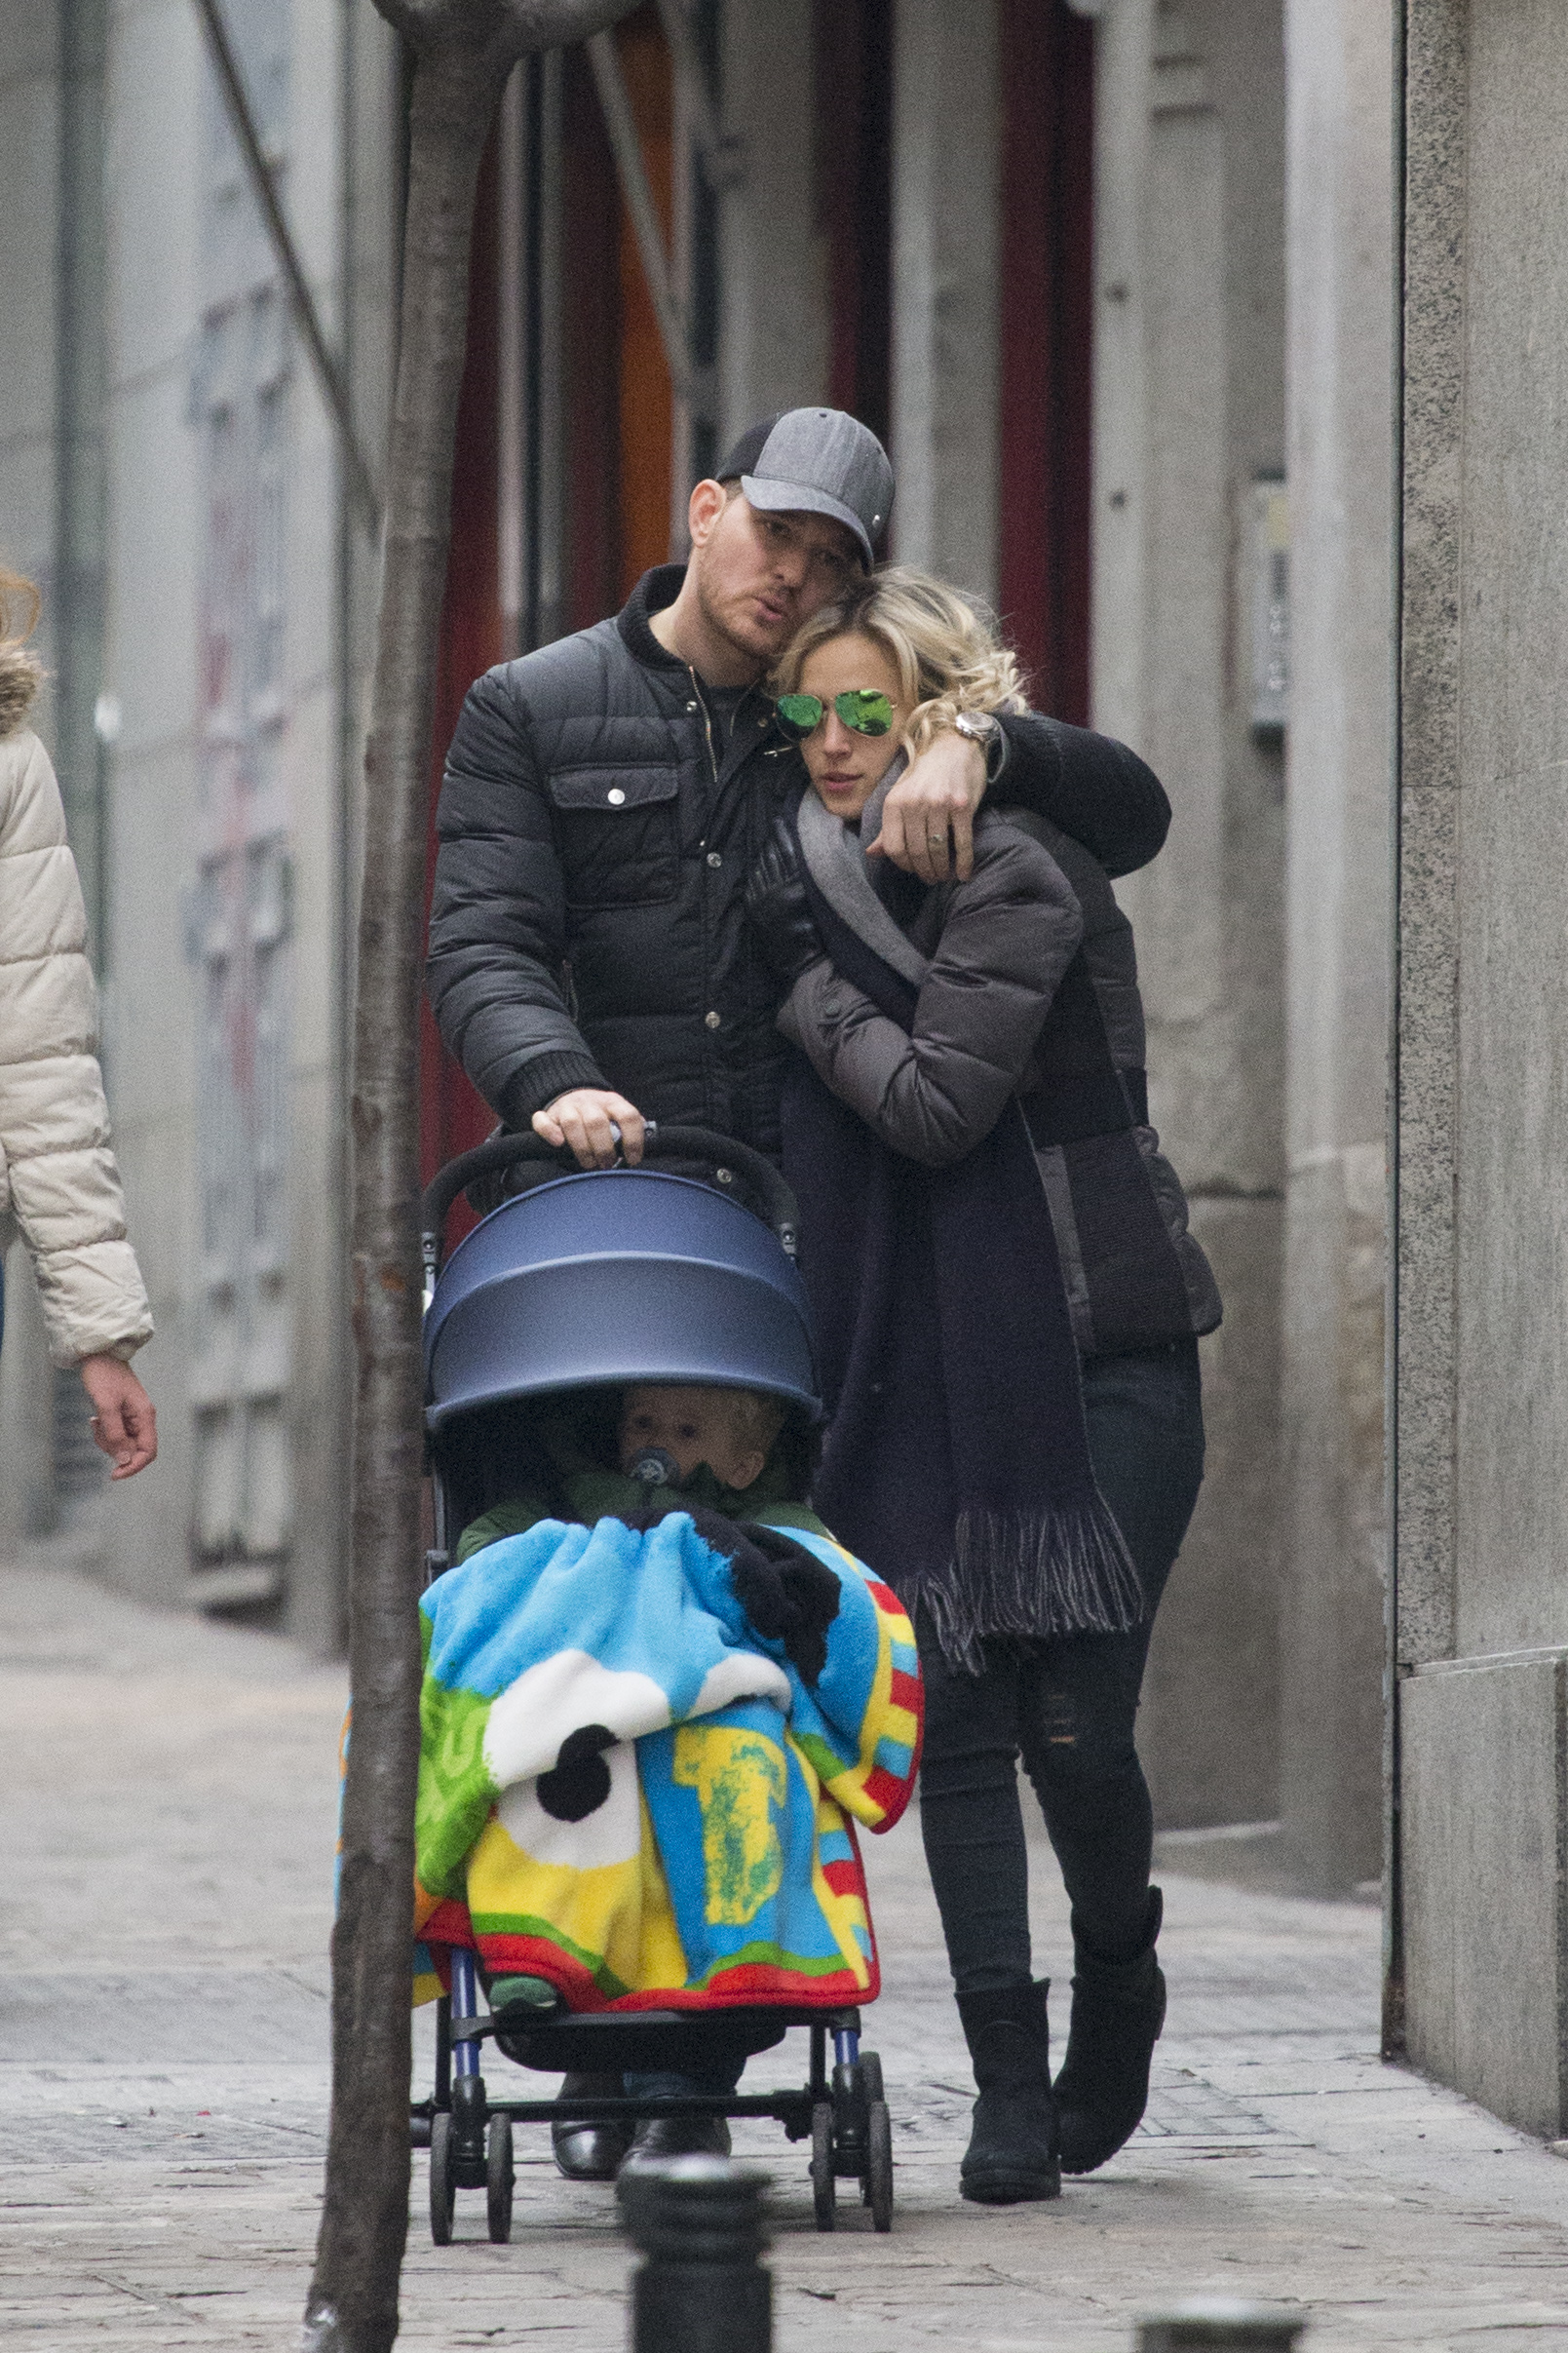 The couple and their son spotted in Madrid, Spain on February 12, 2015 | Source: Getty Images